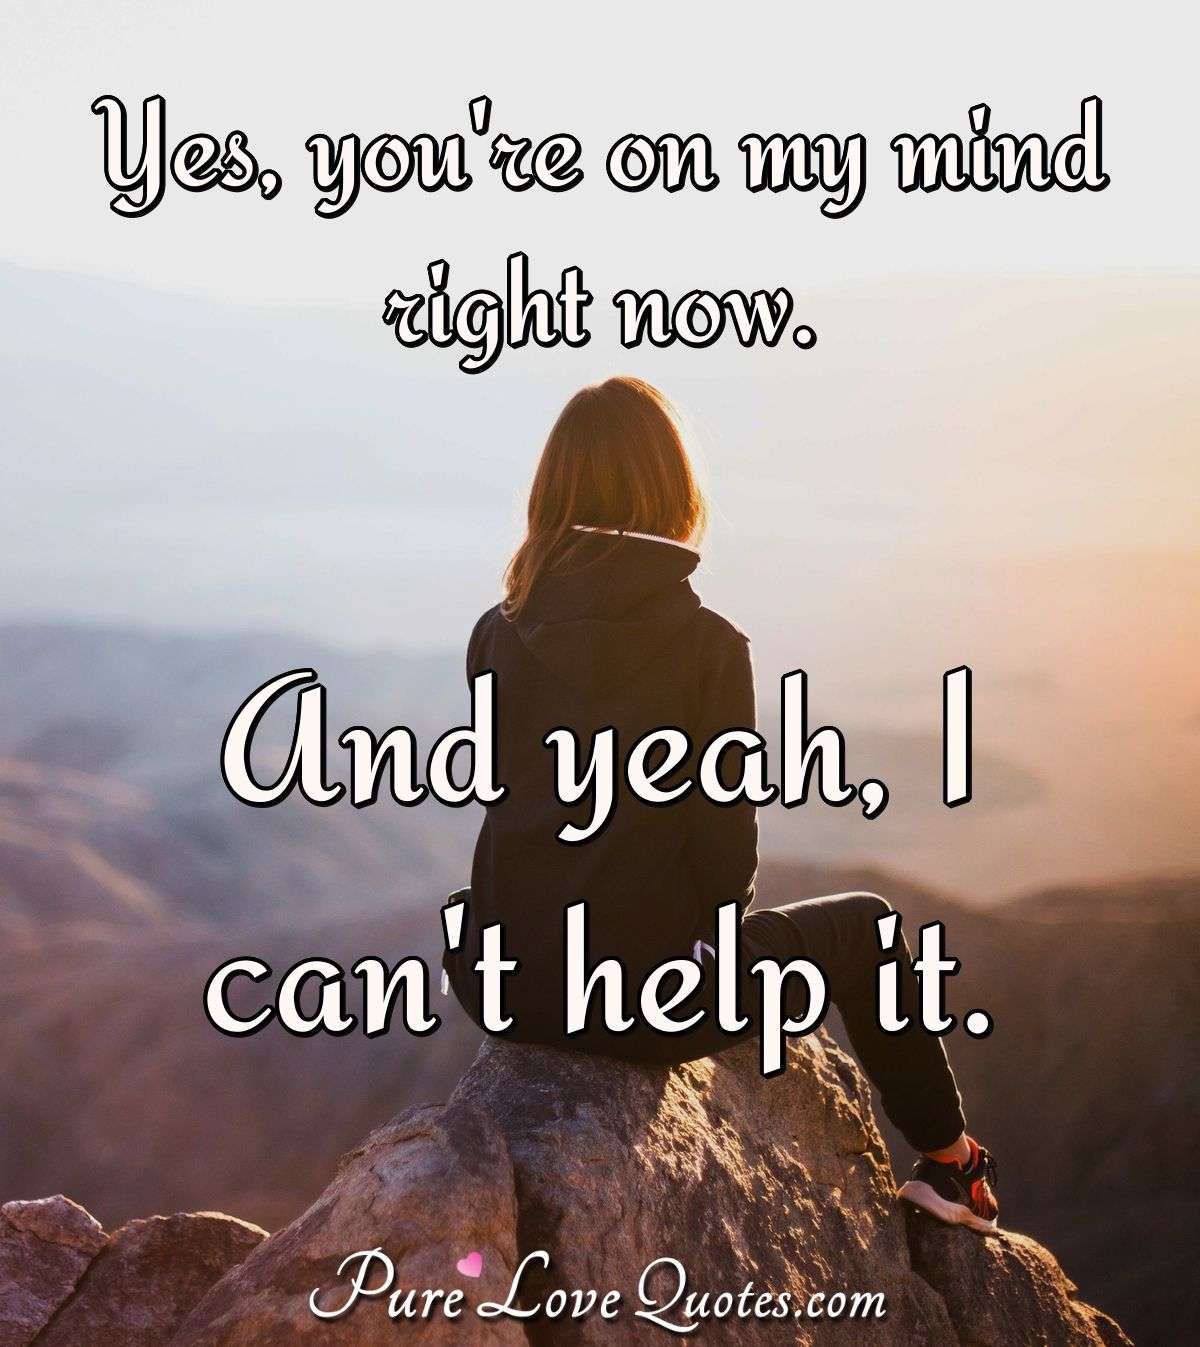 Yes, you're on my mind right now. And yeah, I can't help it. - Anonymous